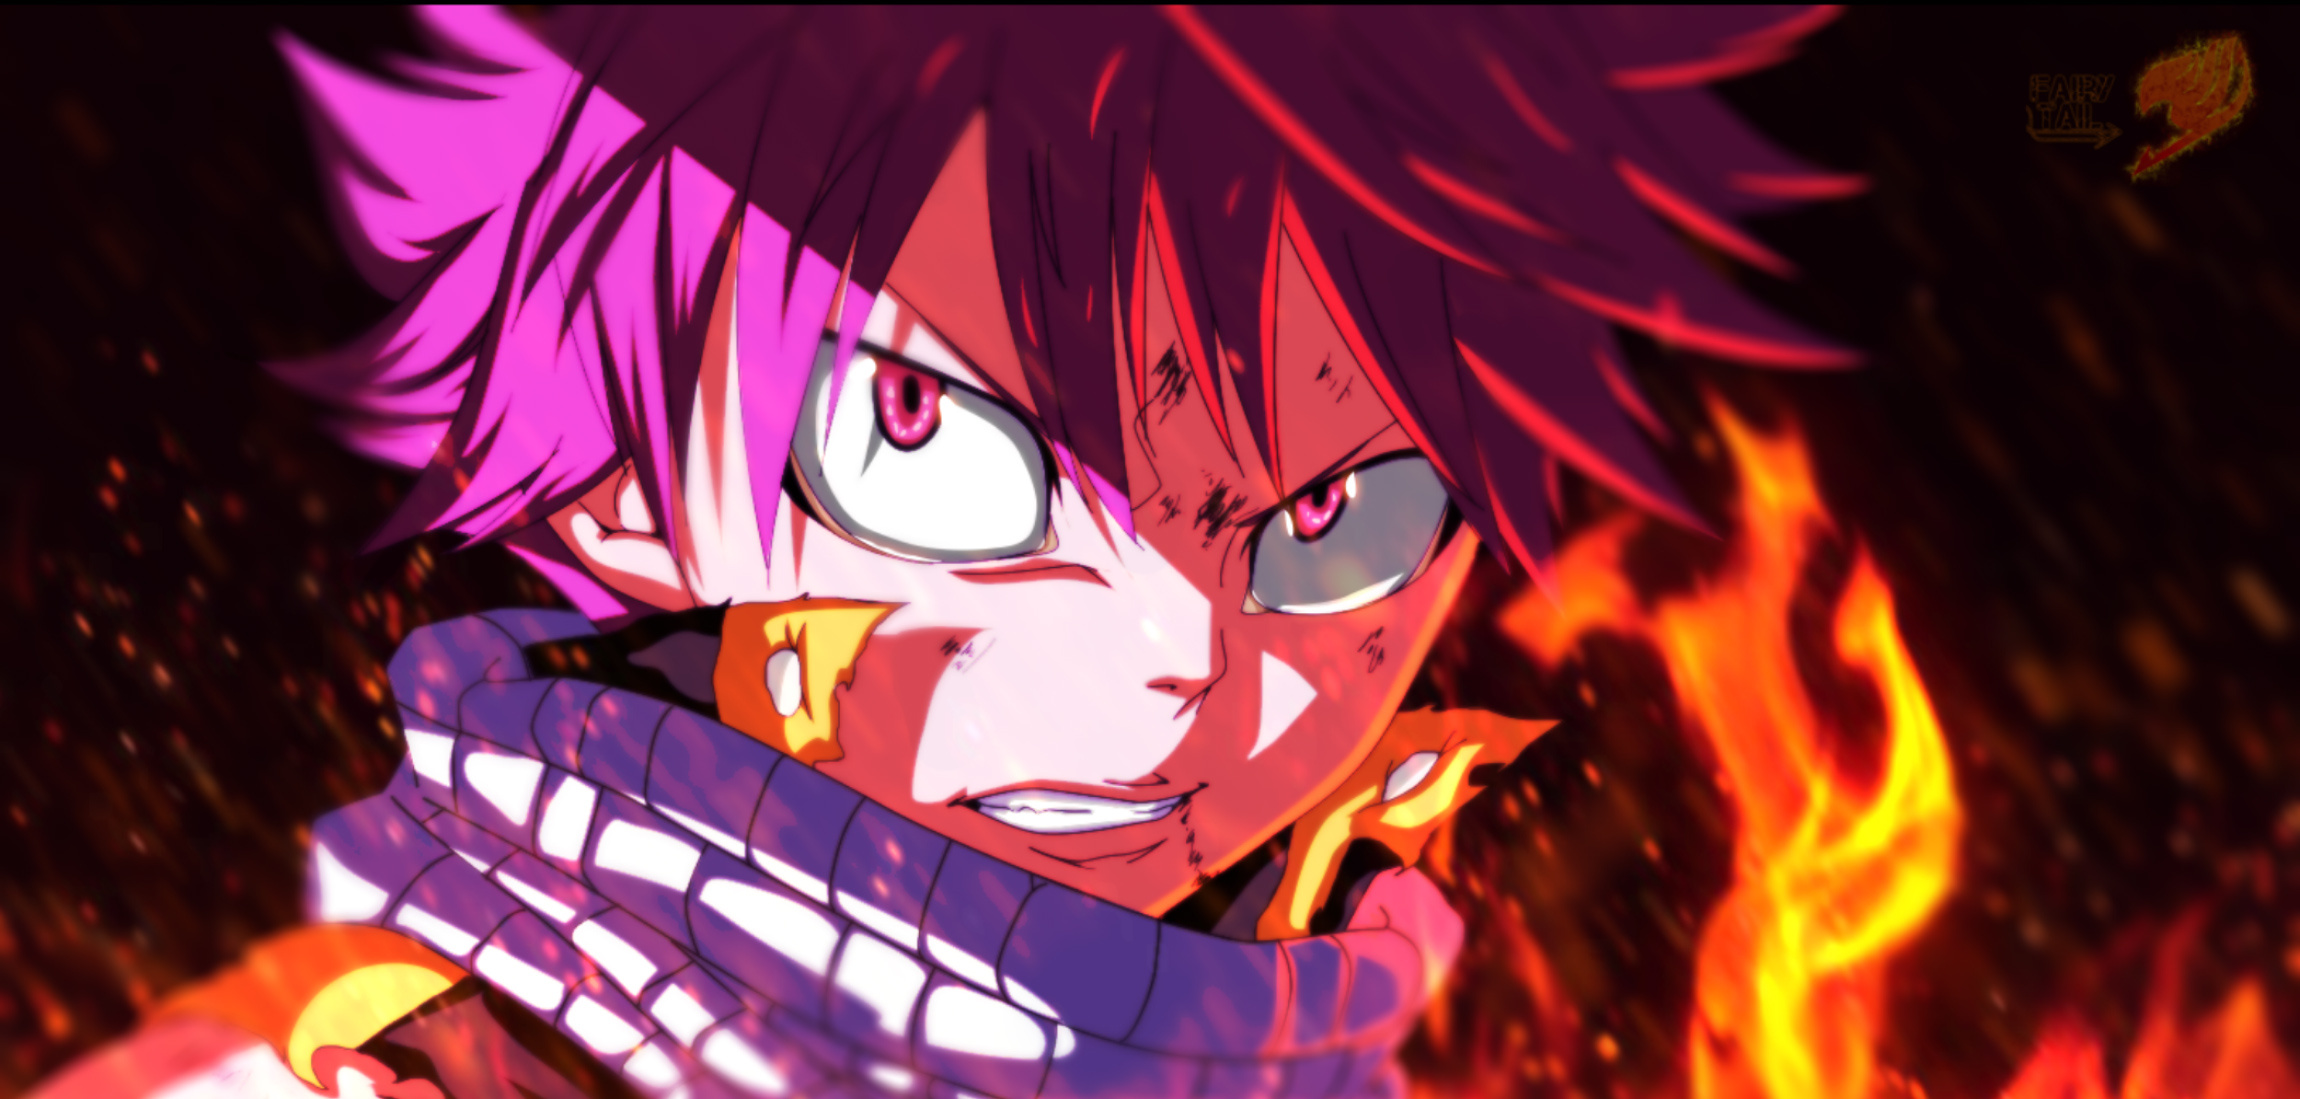 Natsu (Fairy Tail): Voiced by Tetsuya Kakihara in the Japanese version of the anime. 2300x1100 Dual Screen Background.